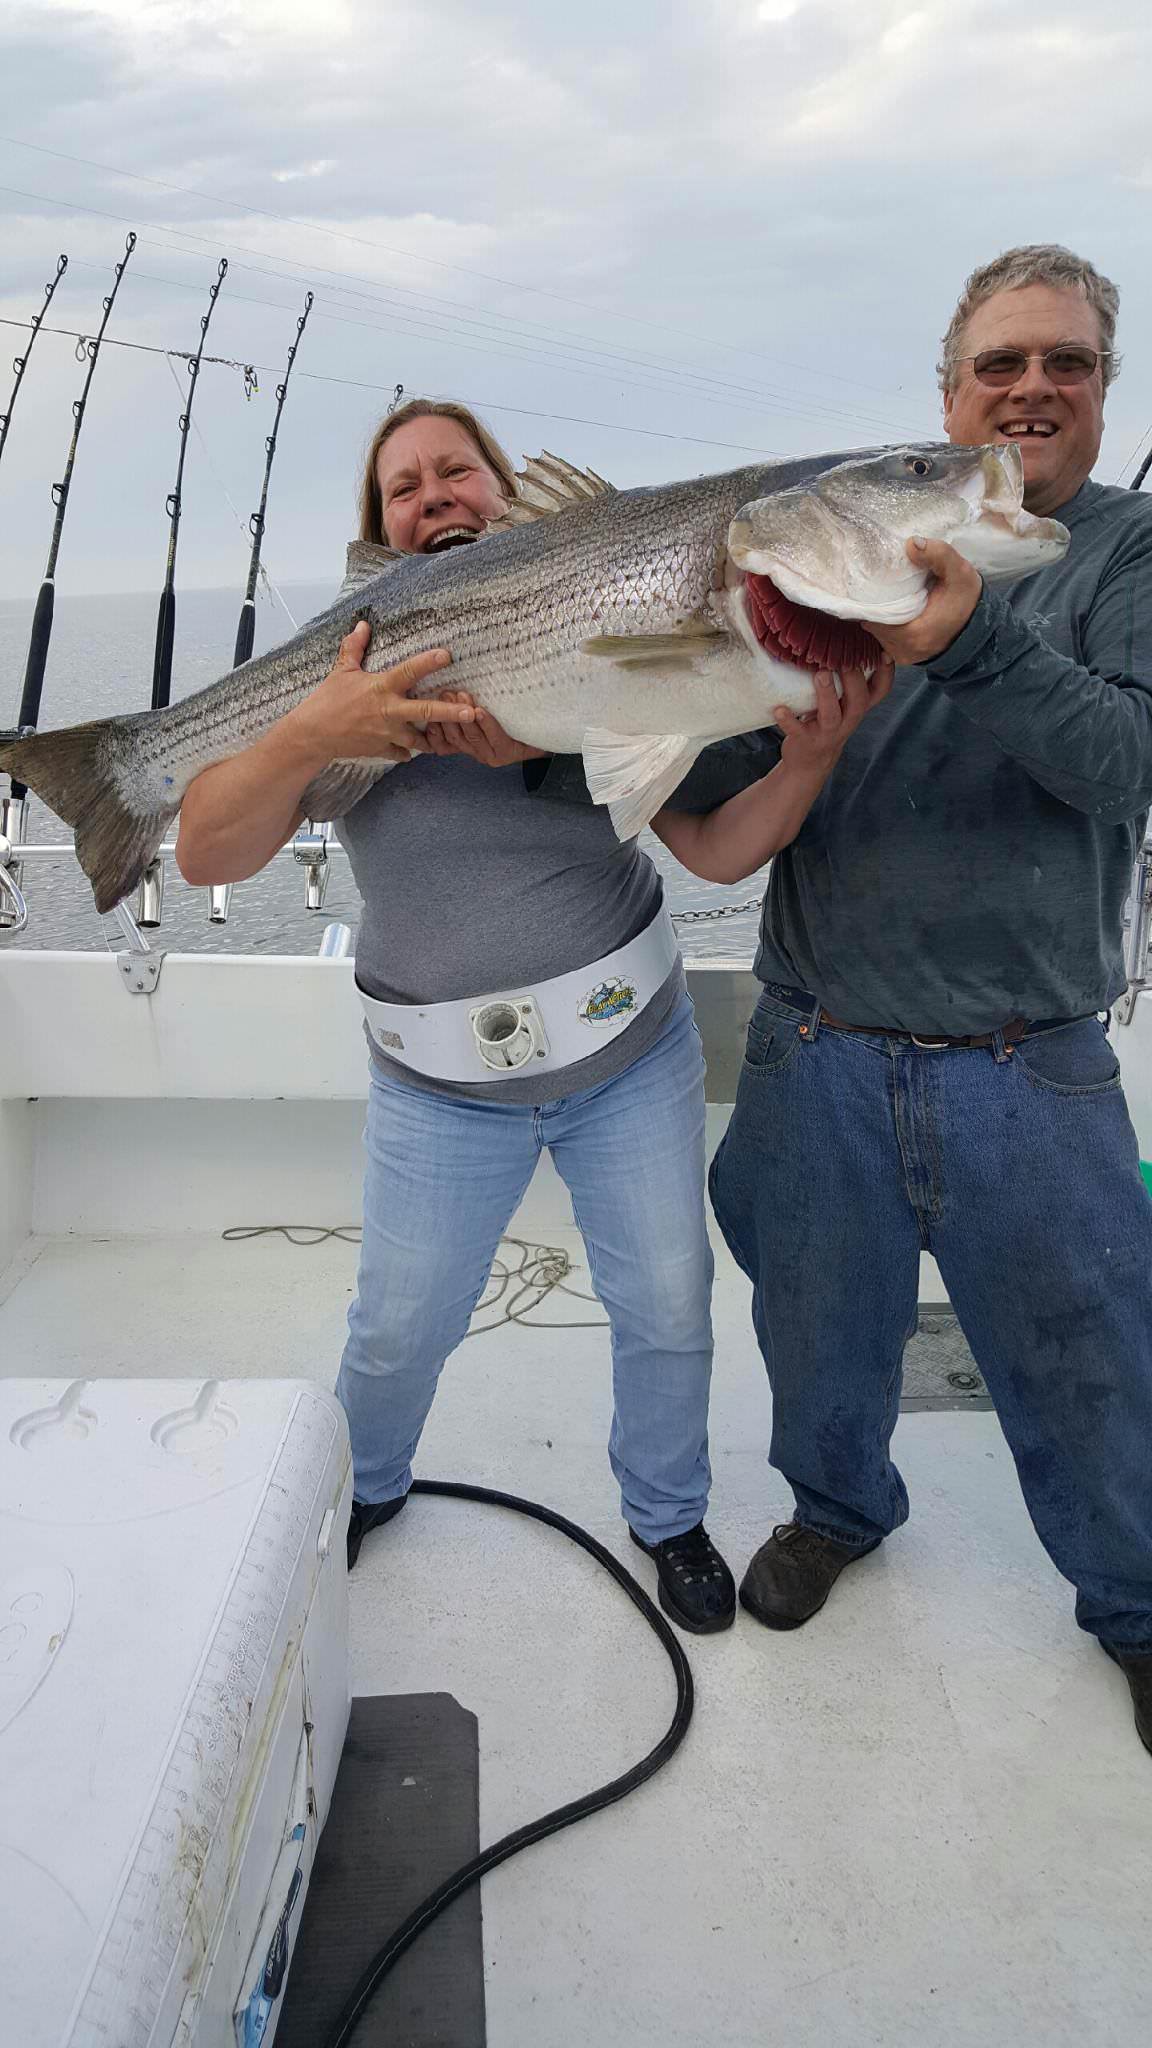 48 Inches! The Biggest Striped Bass So Far This Year!